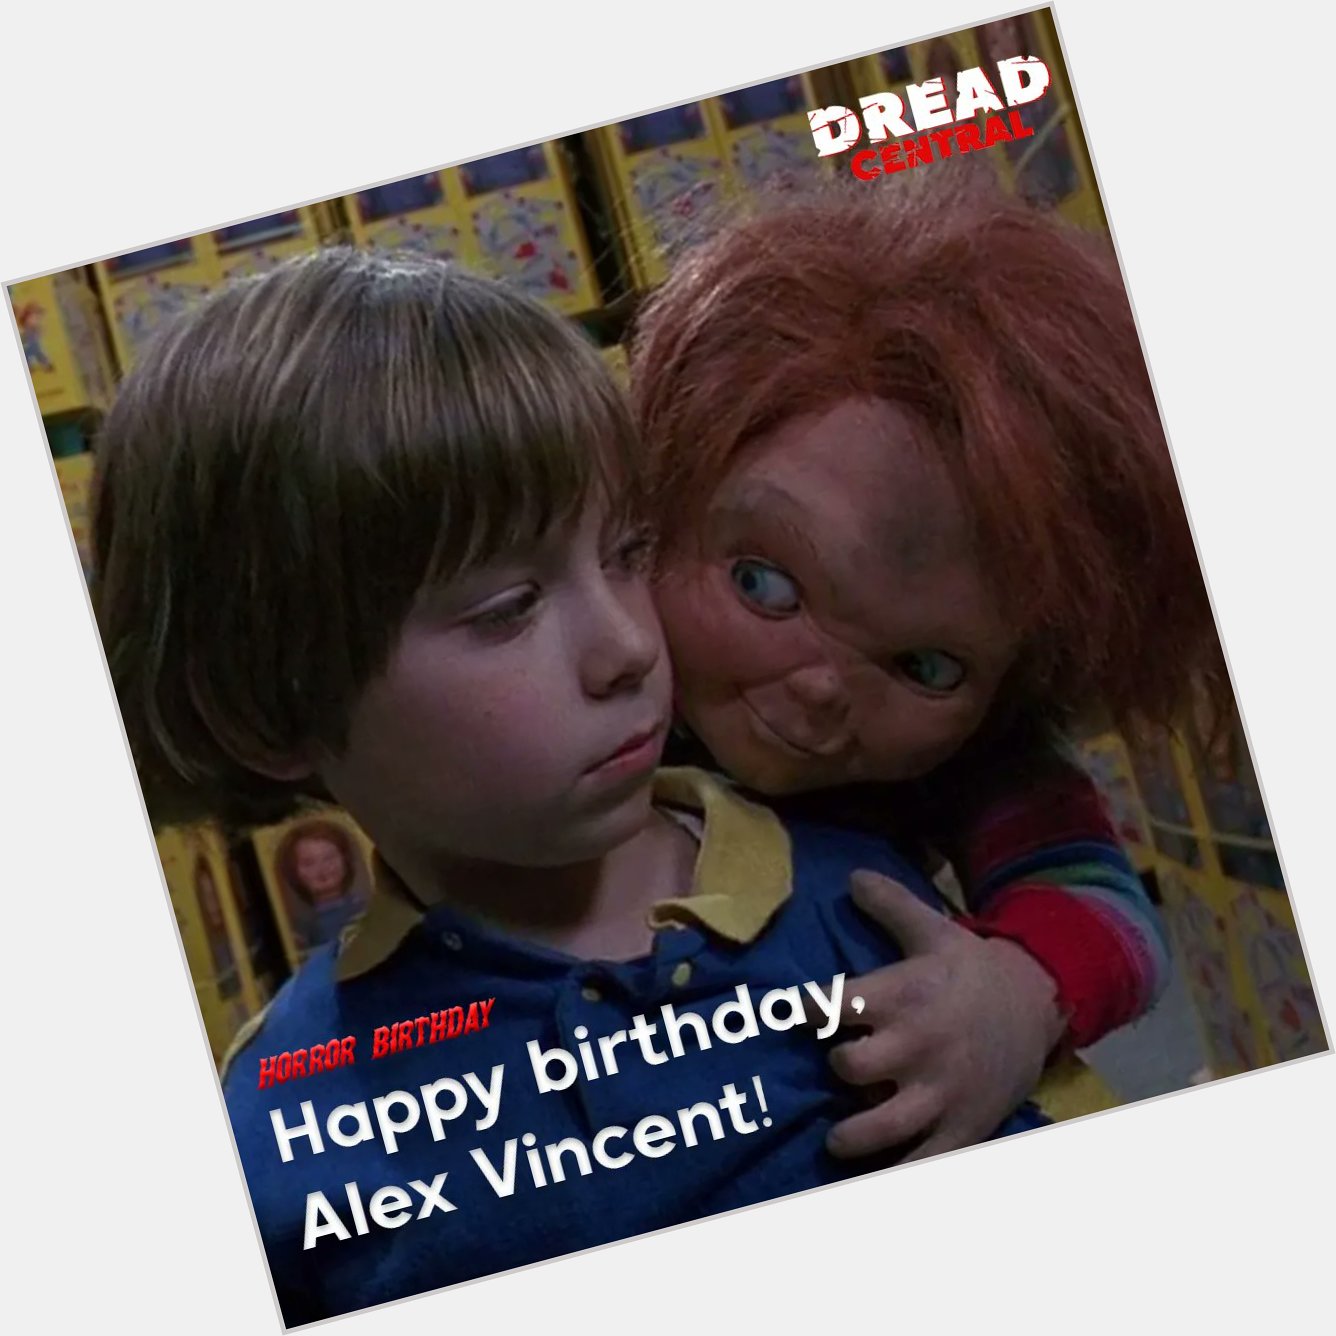 Happy 42nd birthday to Child s Play franchise actor, Alex Vincent! 